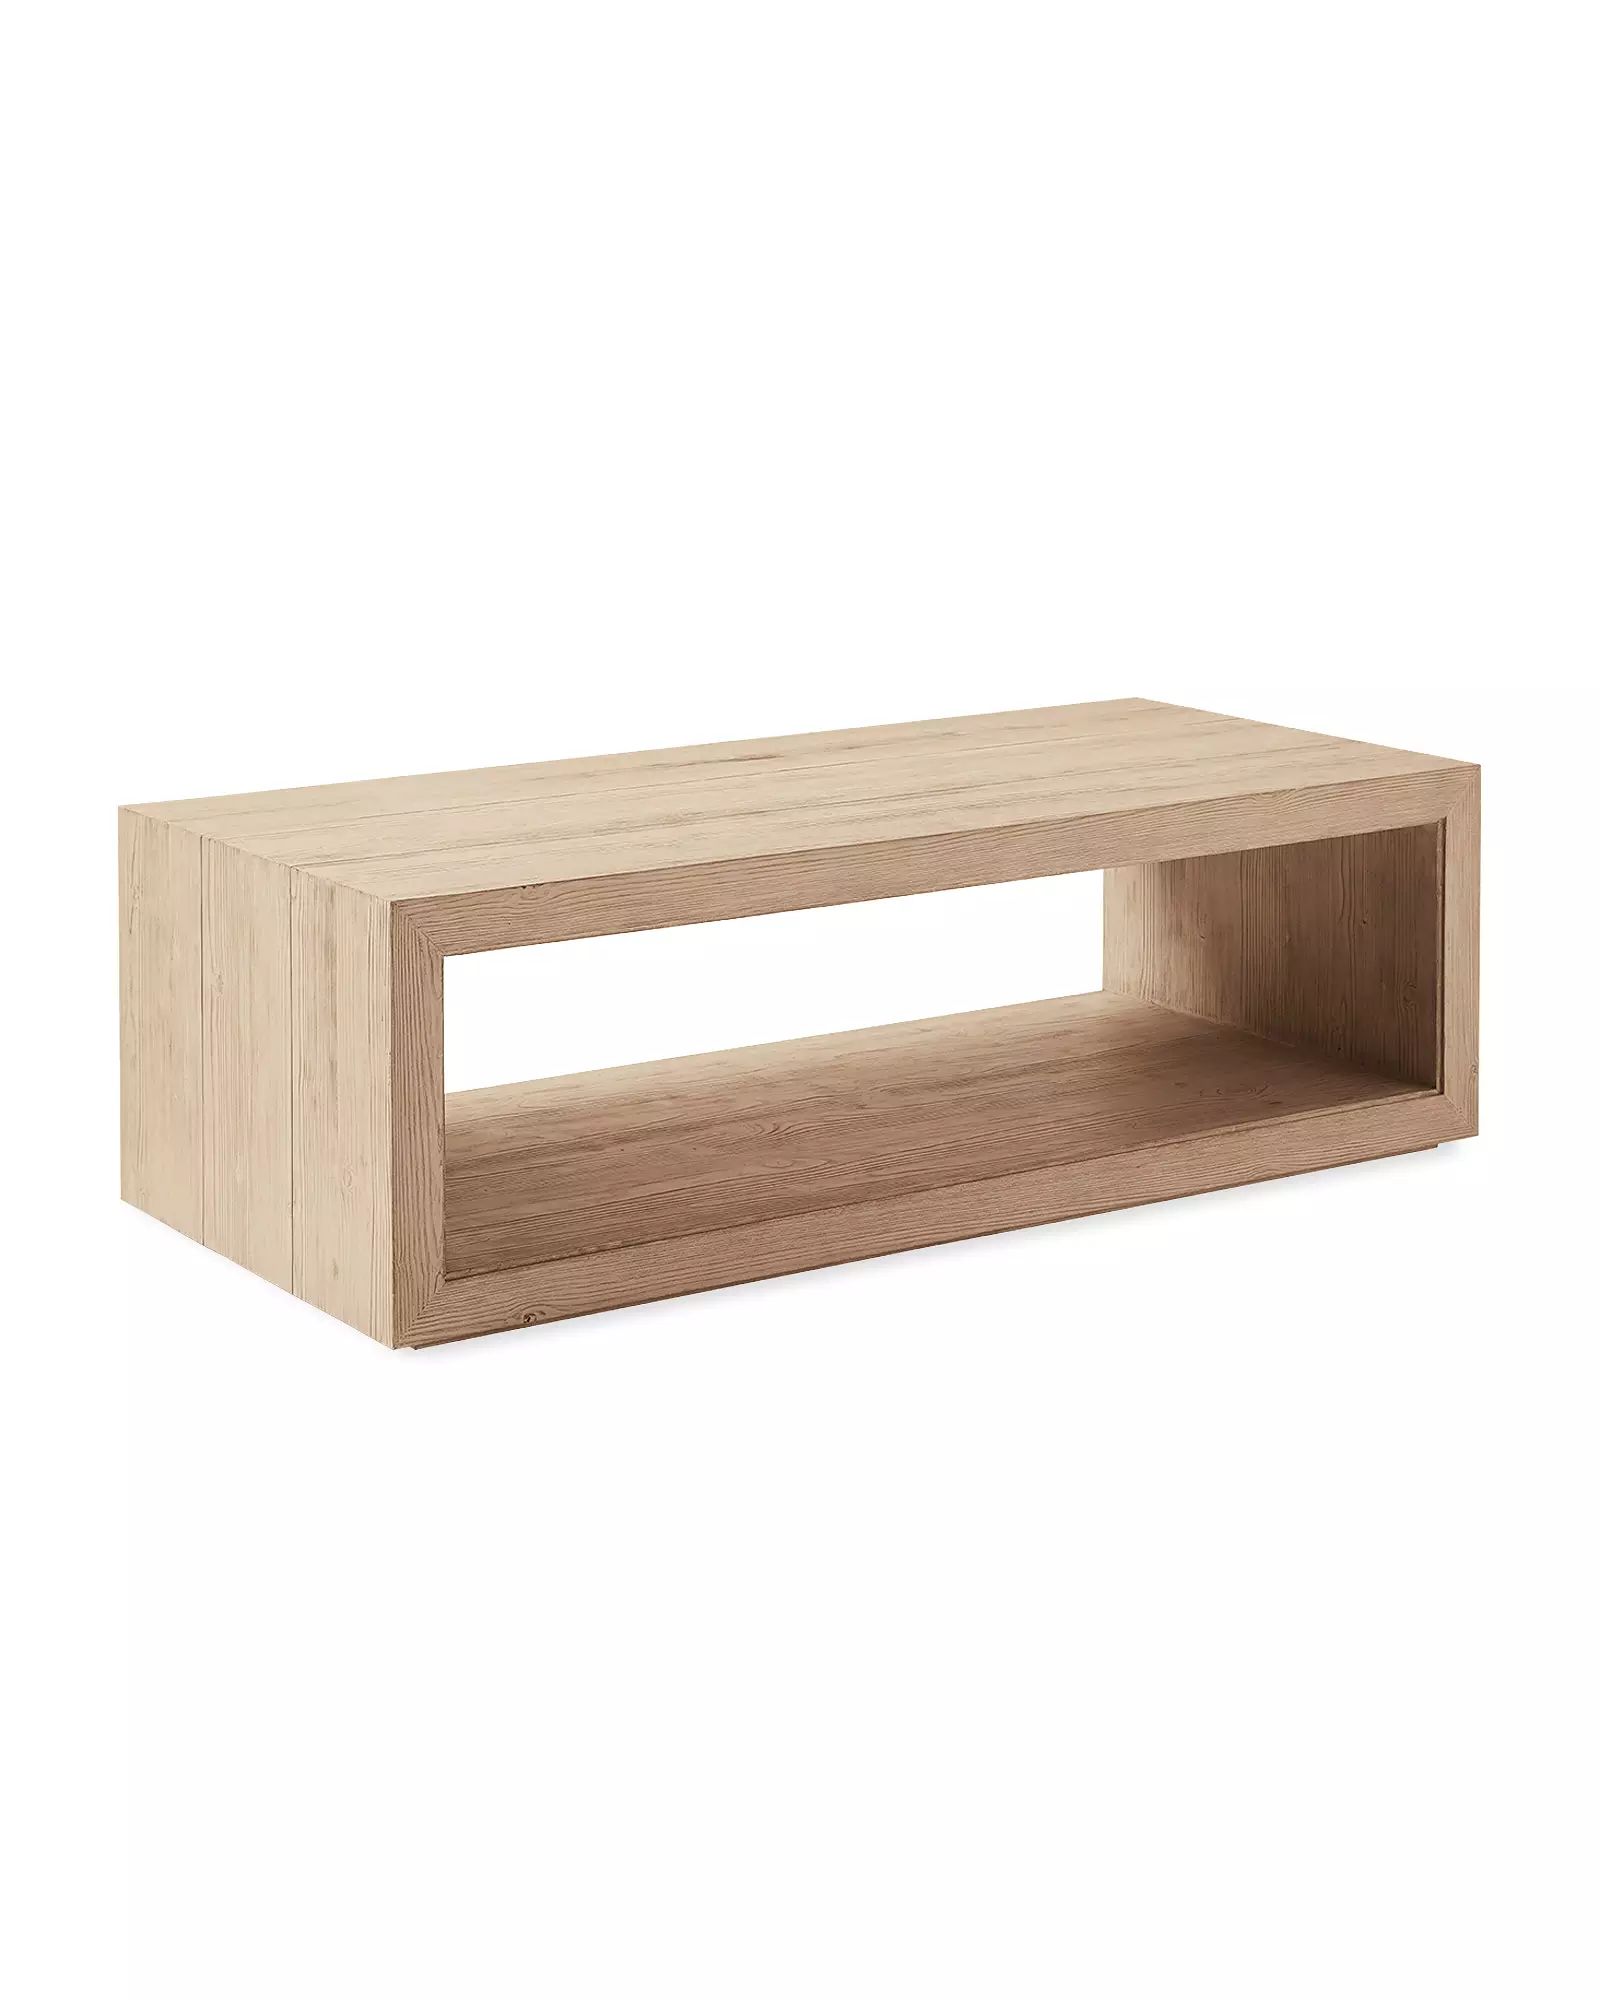 Atelier Rectangular Coffee Table - Sunbleached Pine | Serena and Lily